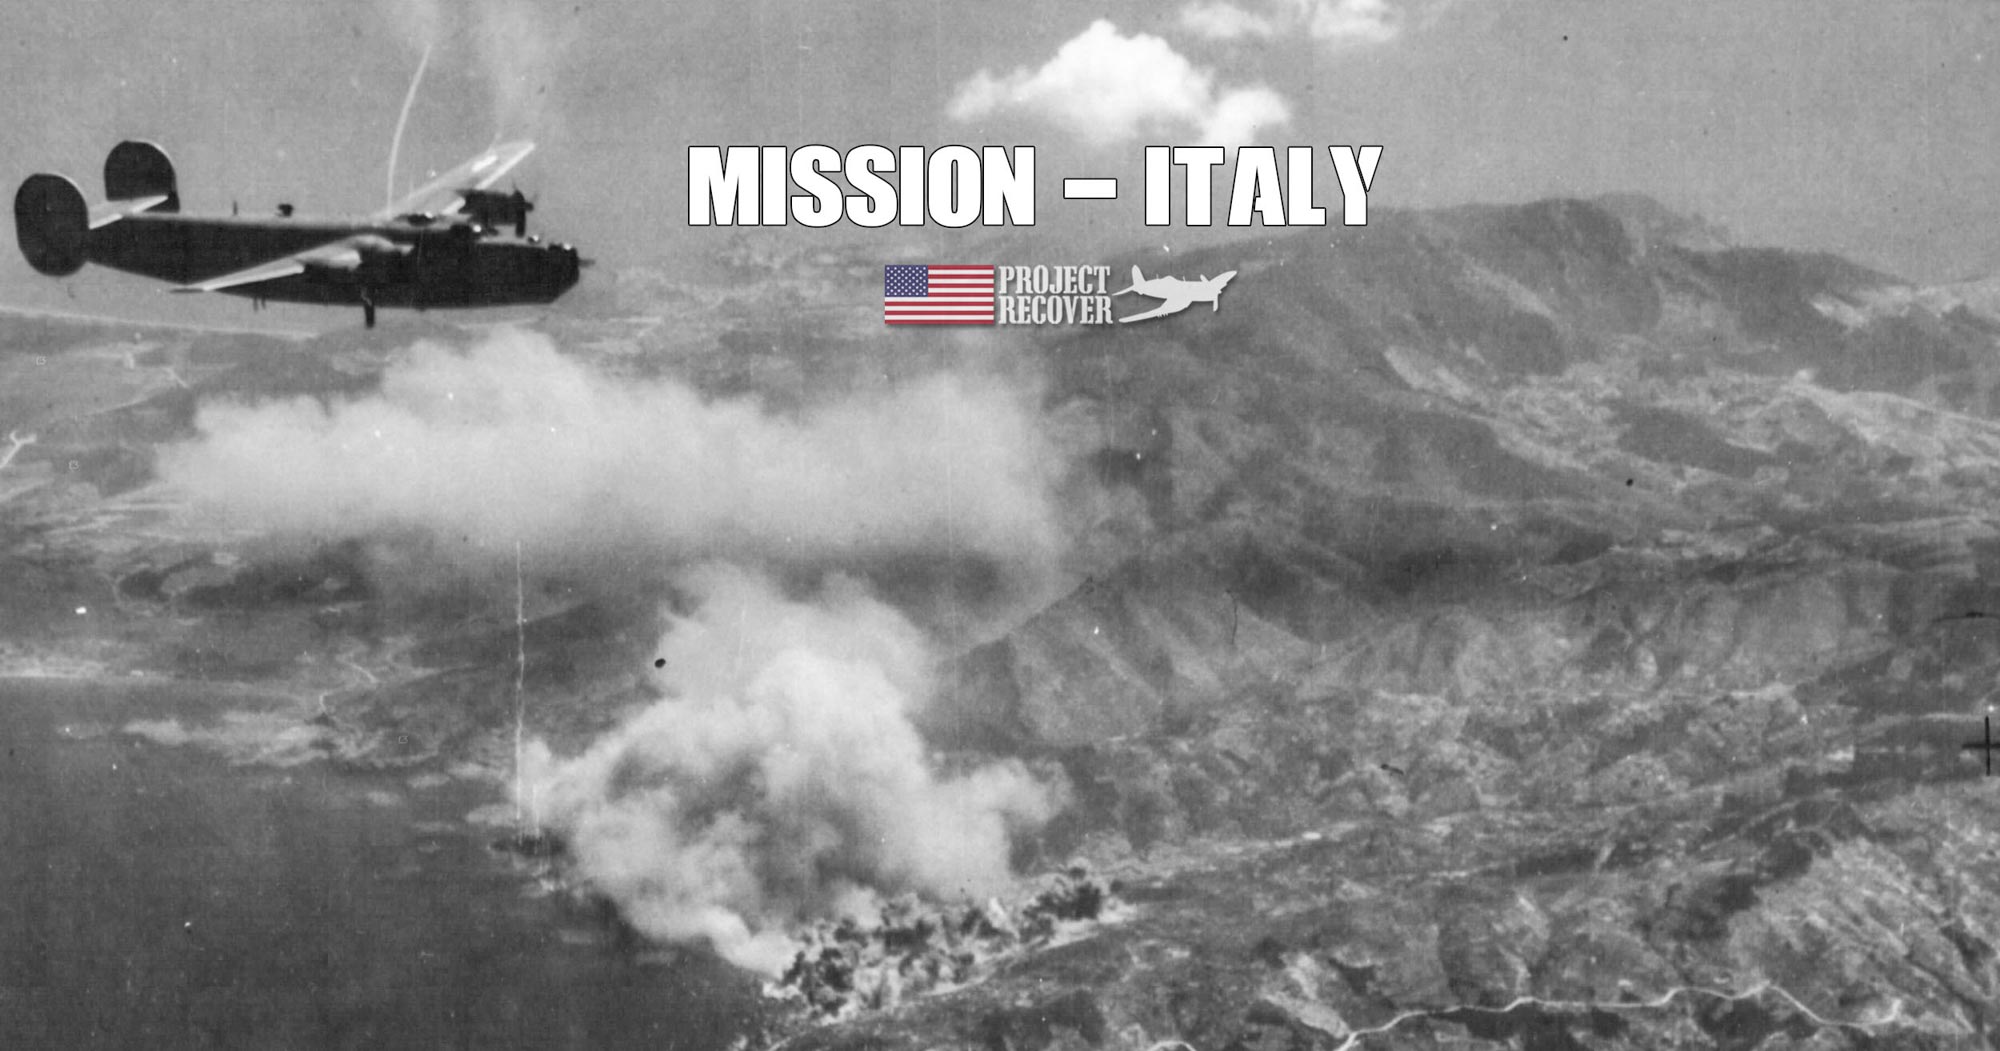 This WWII photo shows B-24 Liberators flying over Porto Santo Stefano, Italy - Project Recover Mission, Italy. Looking for WWII Bombers on the Western Coast of Italy - Project Recover is committed to bringing MIAs home.